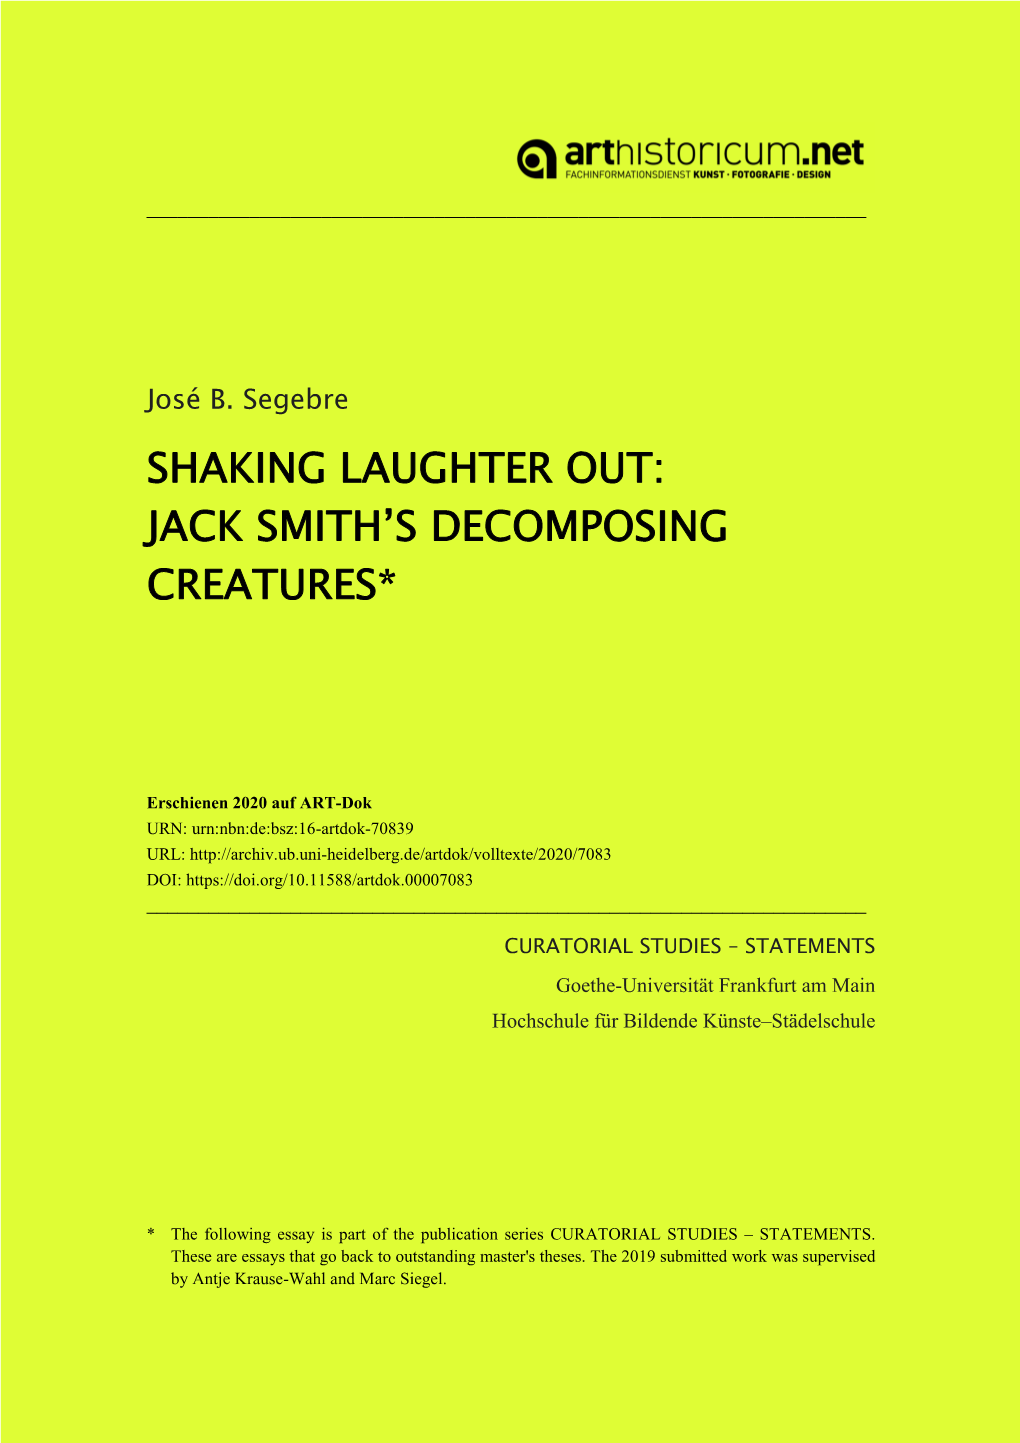 Shaking Laughter Out: Jack Smith's Decomposing Creatures*